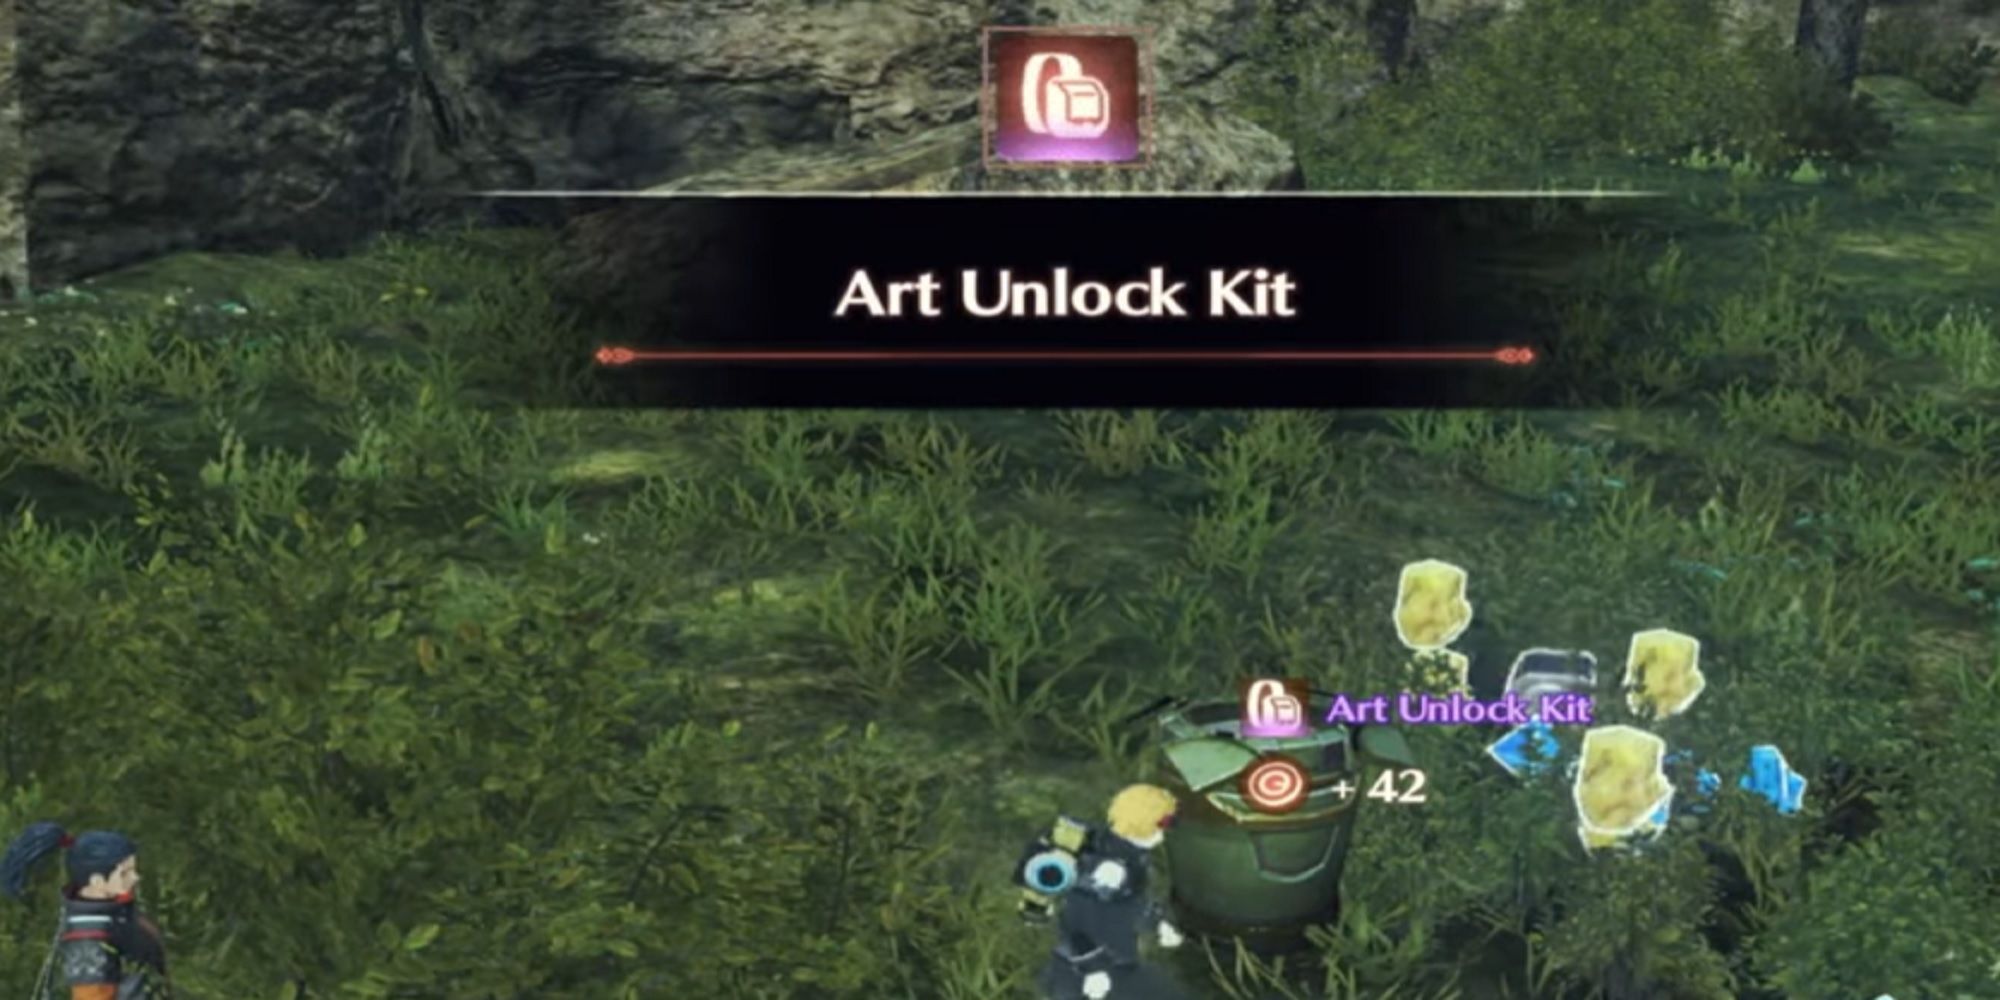 Xenoblade Chronicles 3 - Future Redeemed opening chest containing Art Unlock Kit 